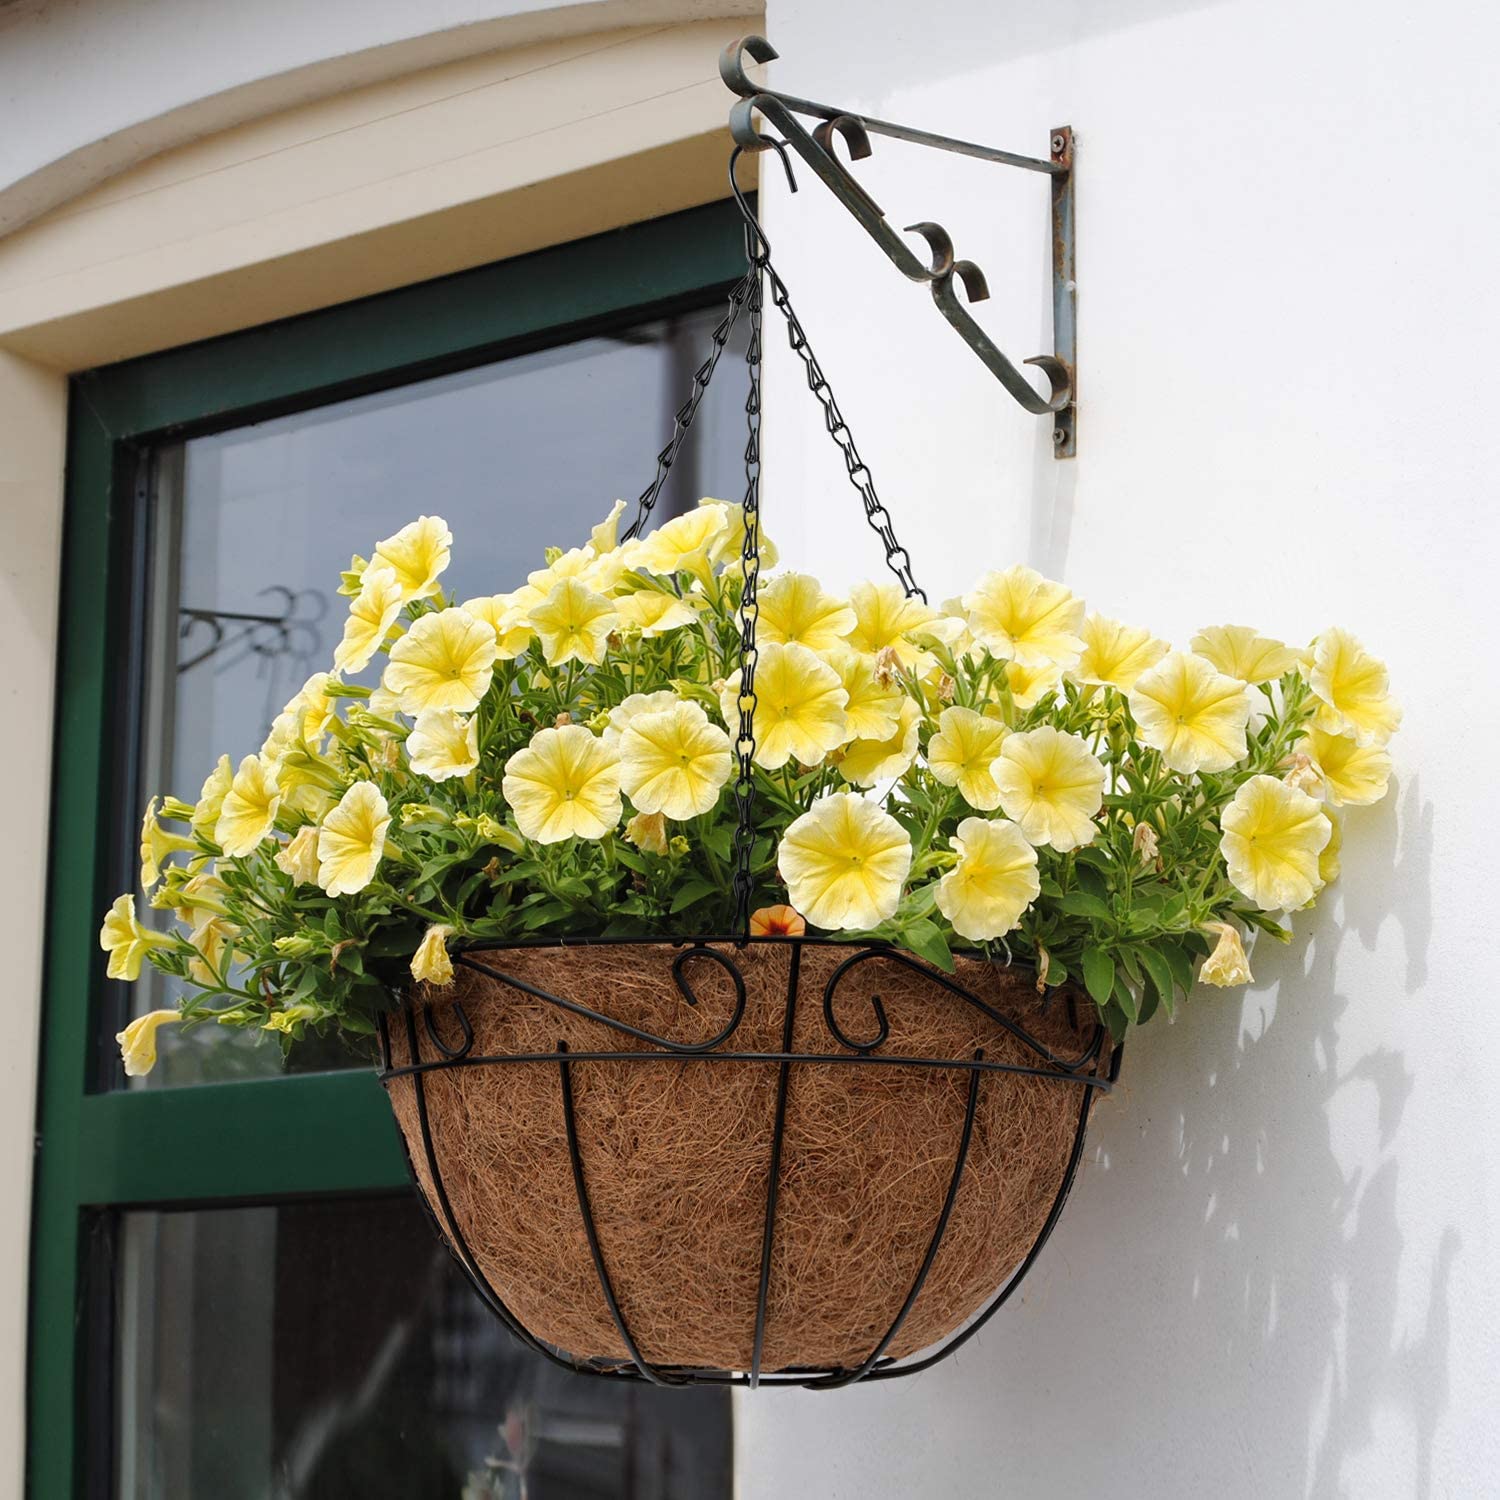 Windfall Metal Hanging Planter Basket with Coco Coir Liner Round Wire Plant Holder with Chain Porch Decor Flower Pots Hanger Garden Decoration Indoor Outdoor Watering Hanging Baskets - image 3 of 7